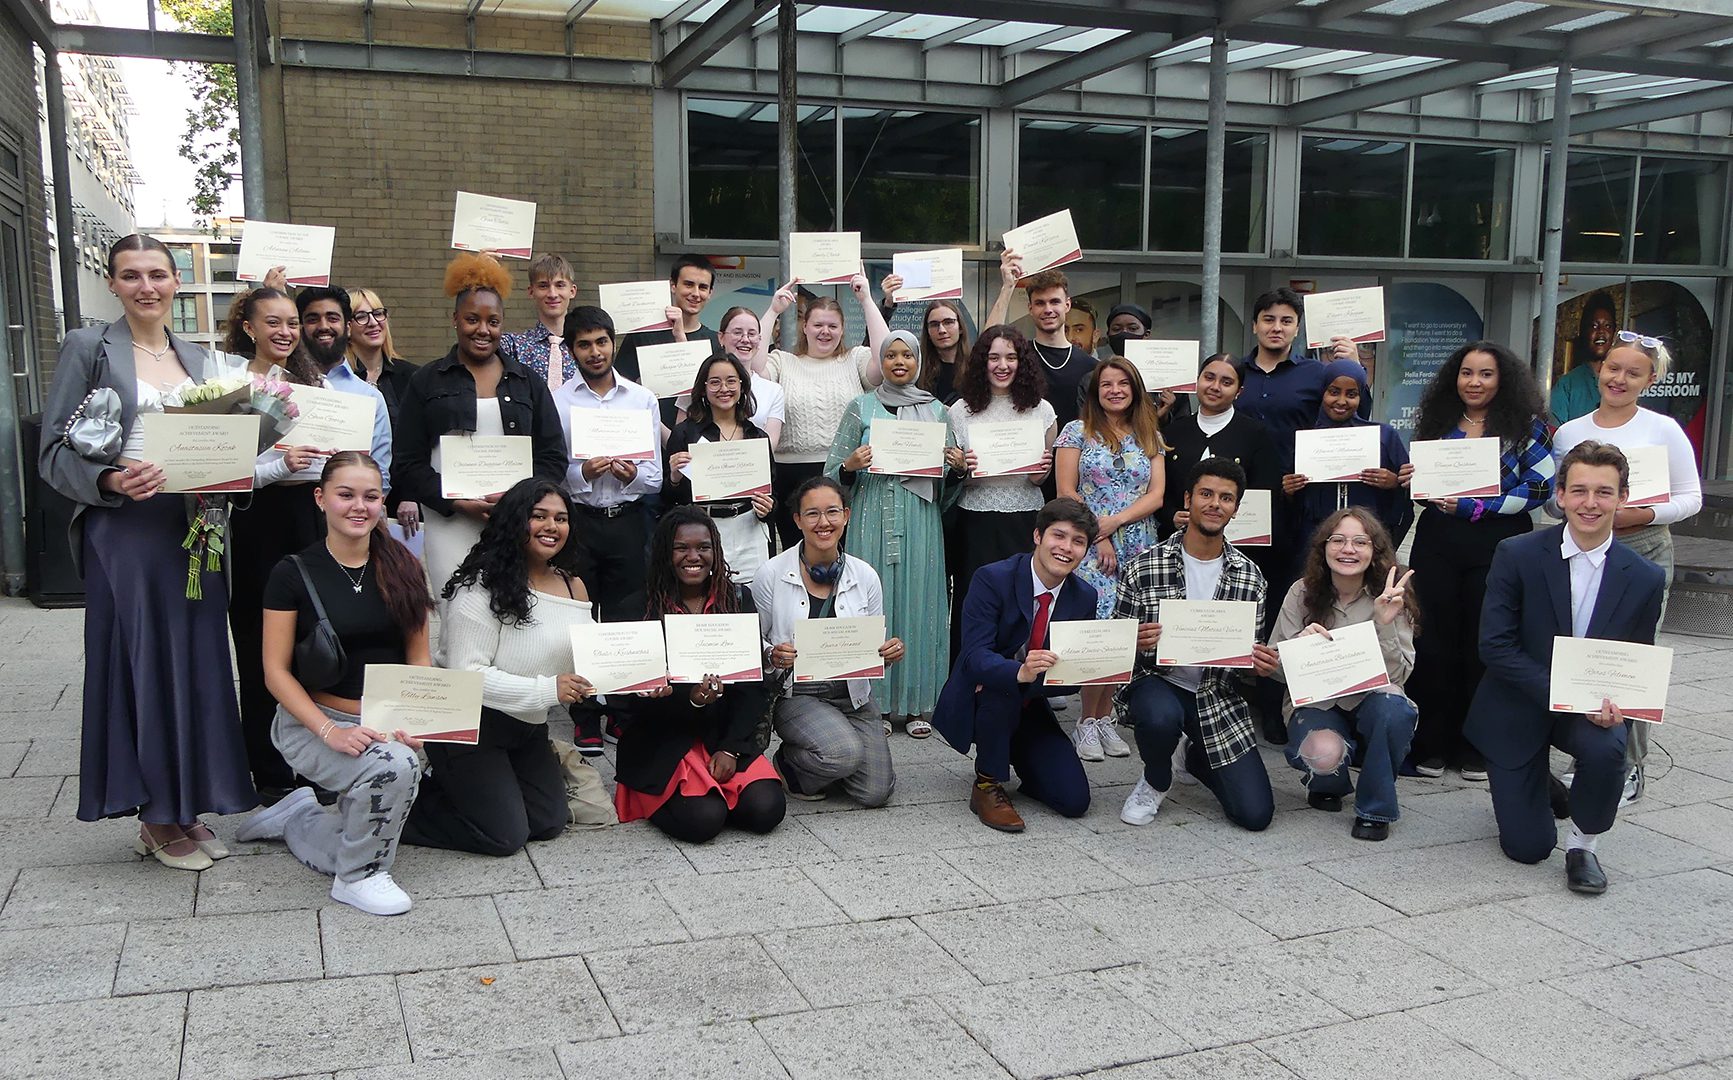 A large group of students celebrating their achievements at award ceremony